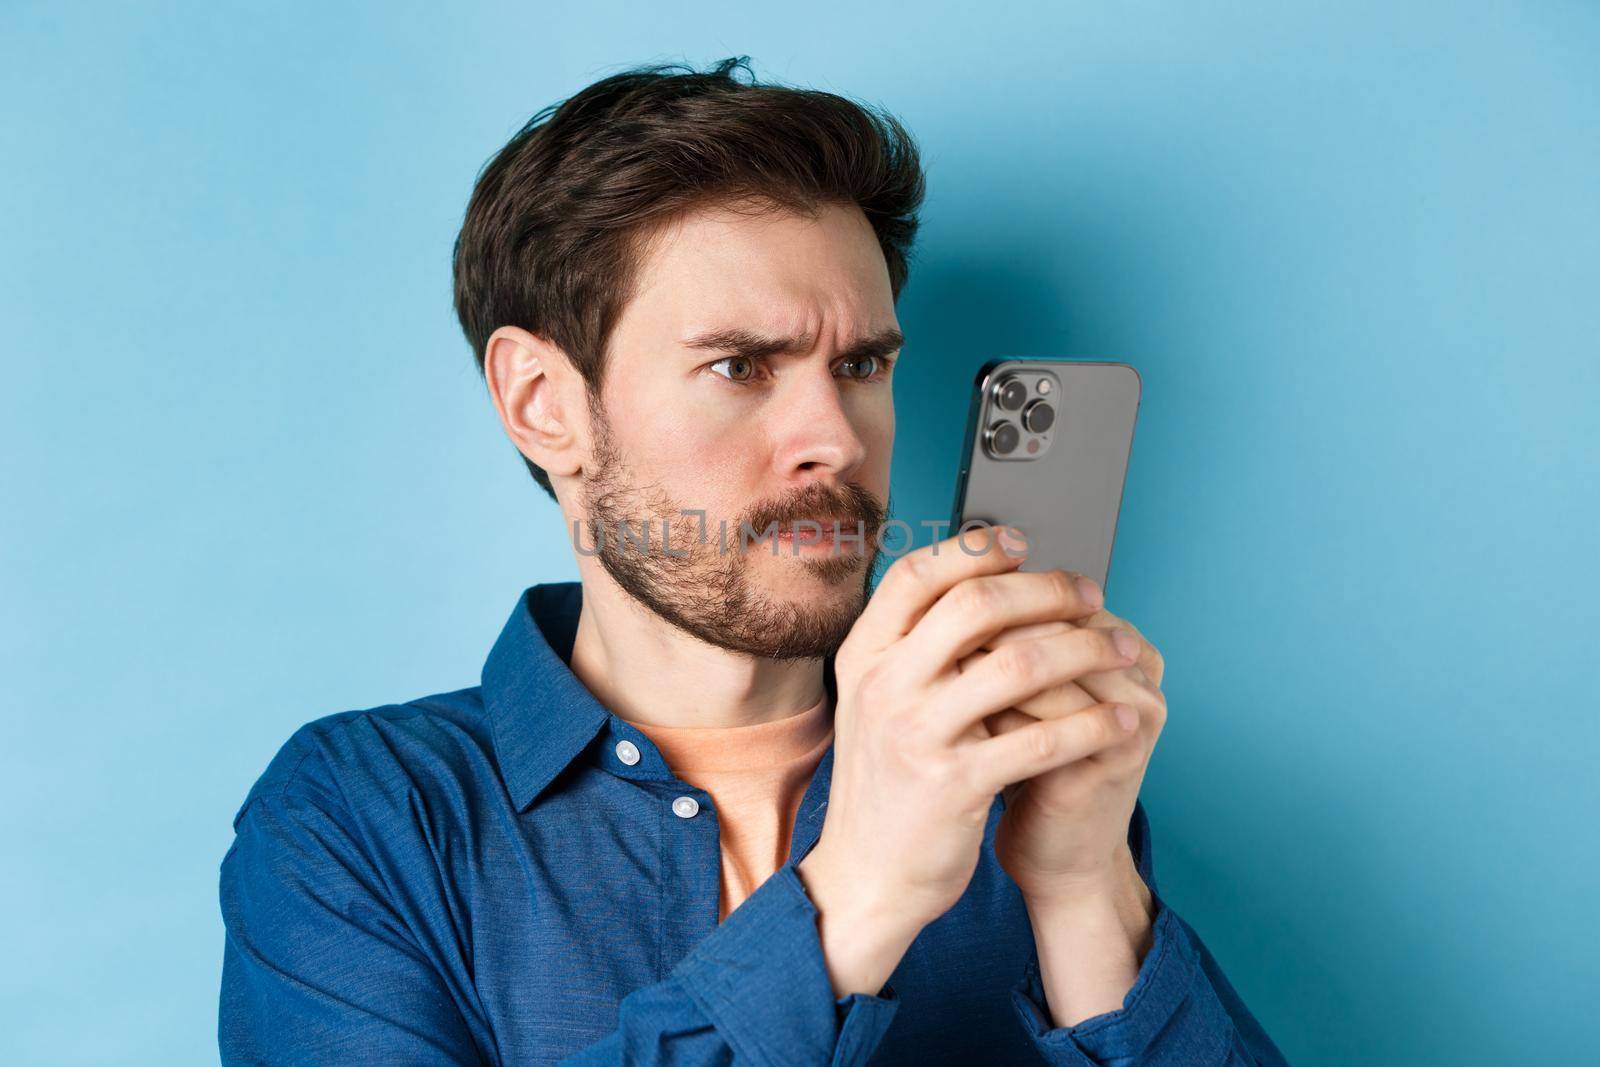 Confused guy staring close at mobile phone screen and frowning, standing on blue background.